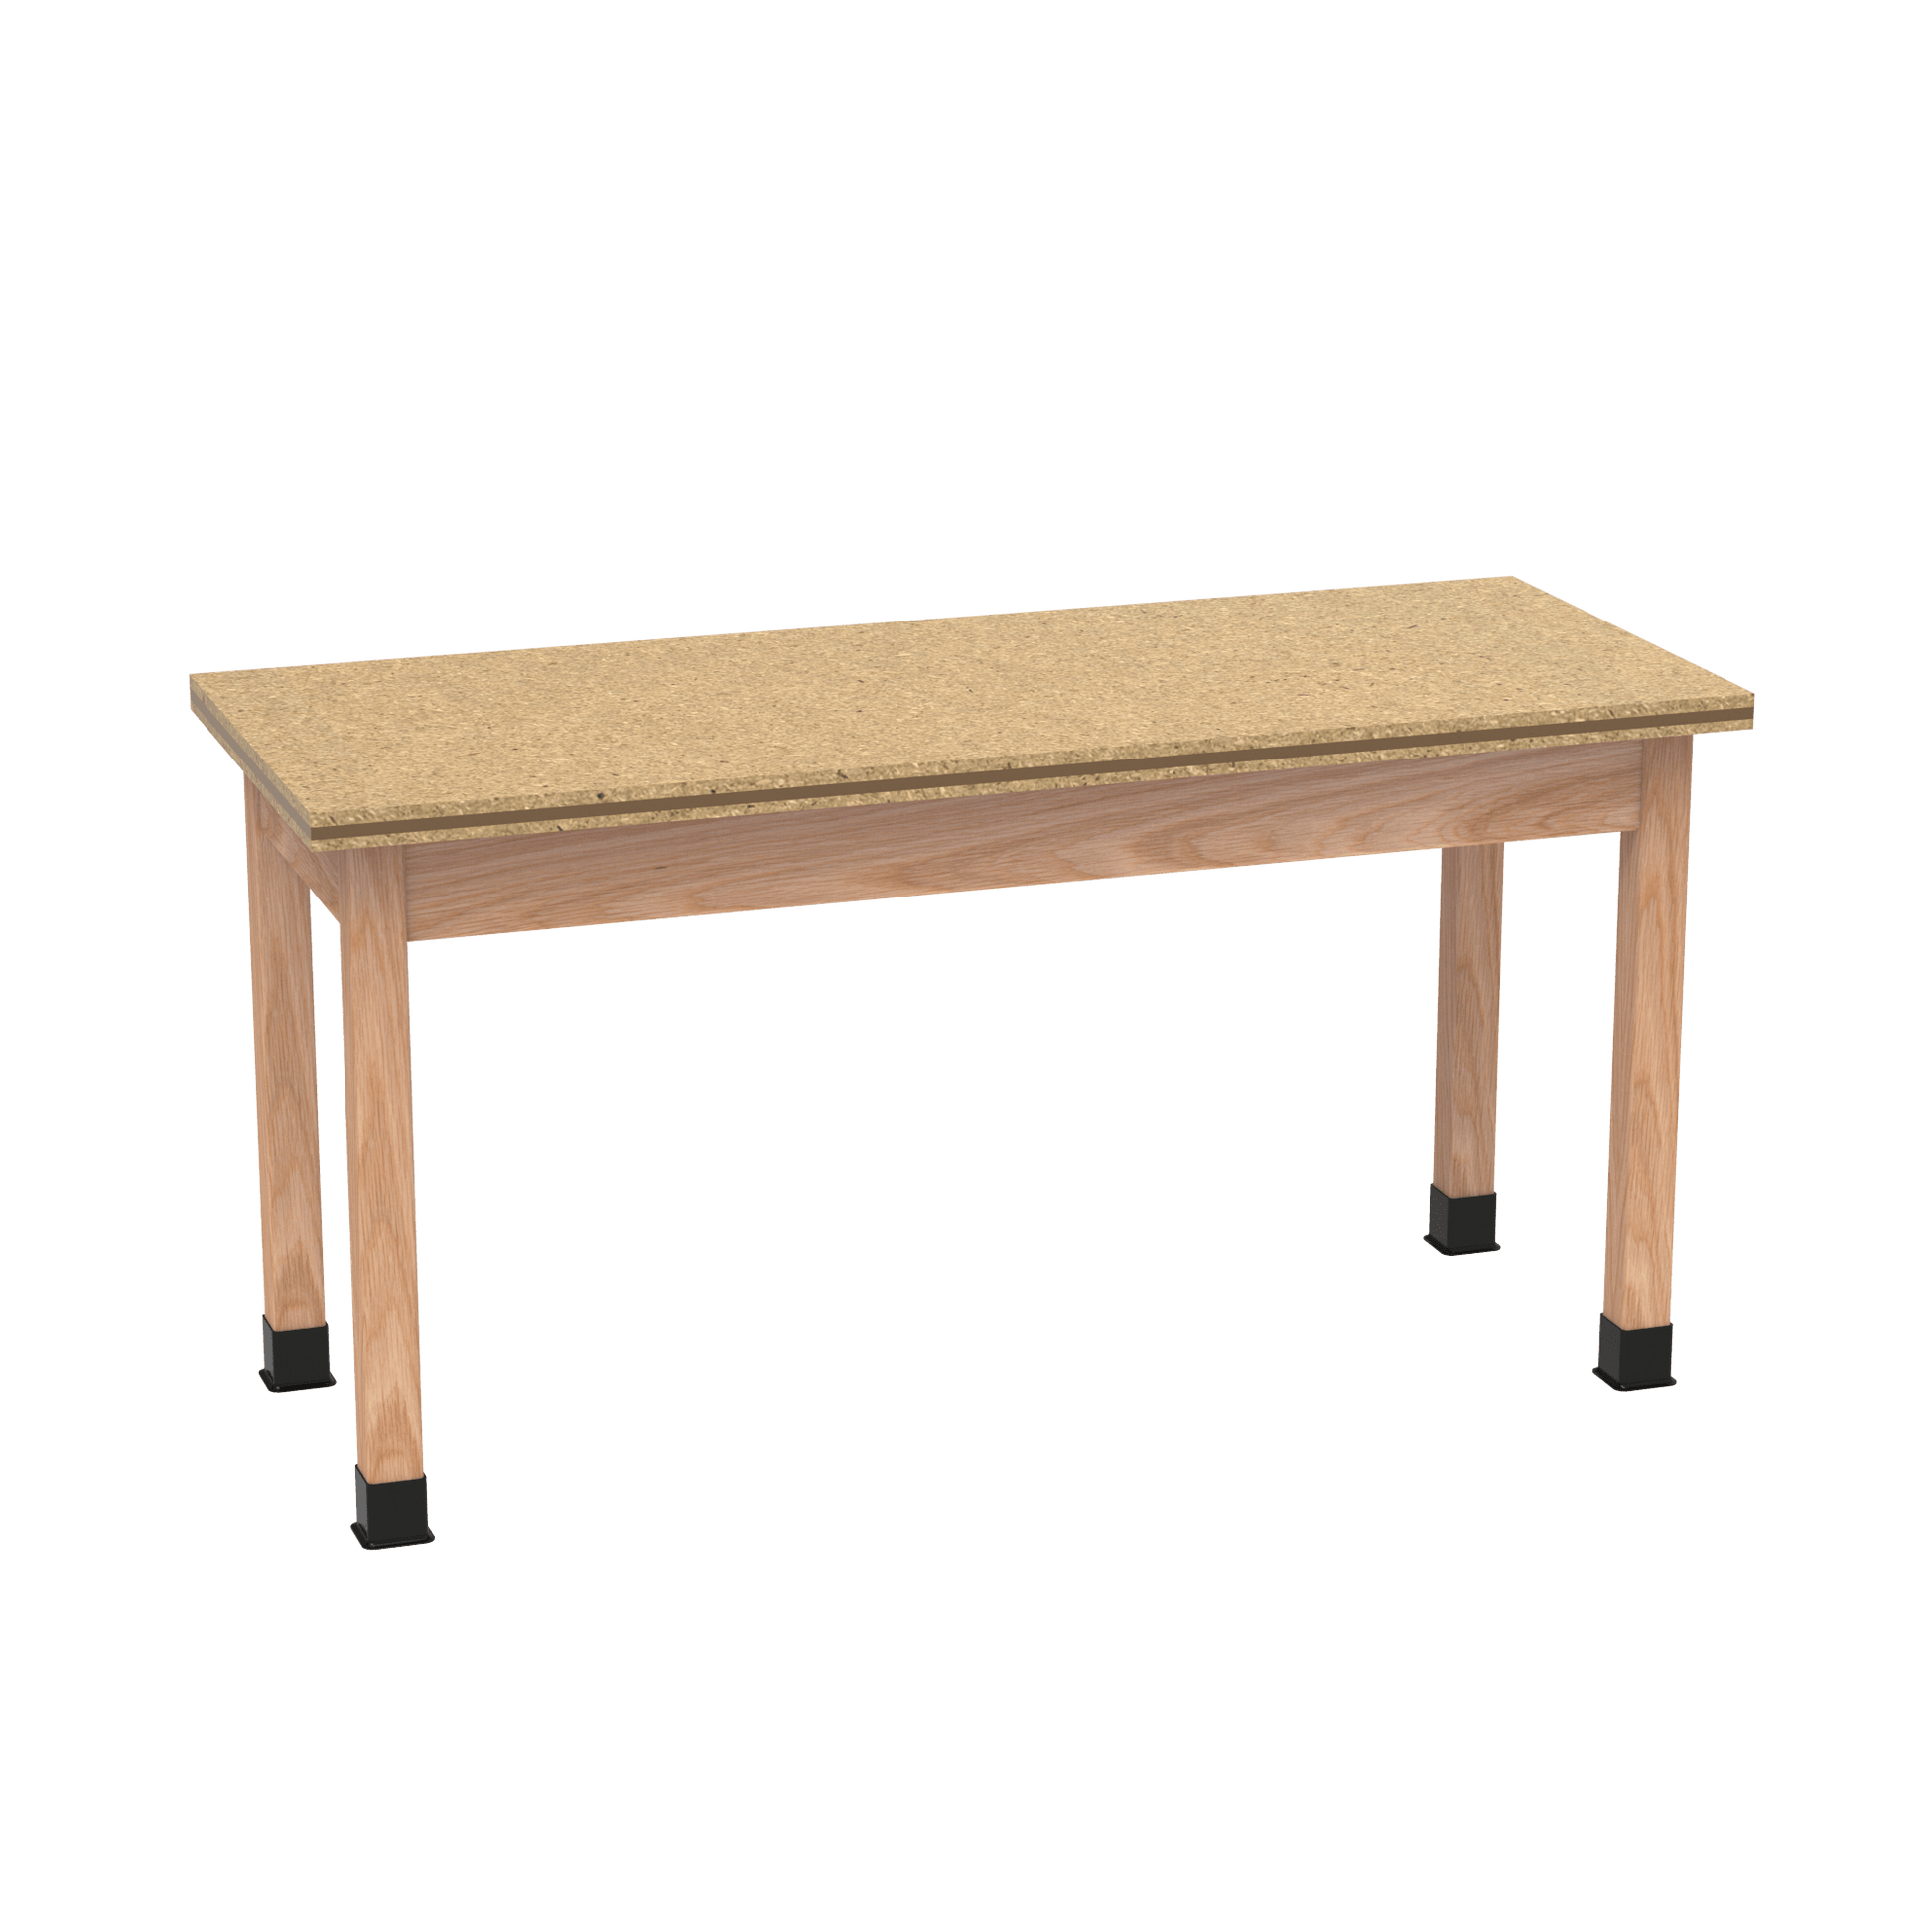 Diversified Woodcrafts Science Table - Plain Apron - 72" W x 21" D - Solid Wood Frame and Adjustable Glides - SchoolOutlet